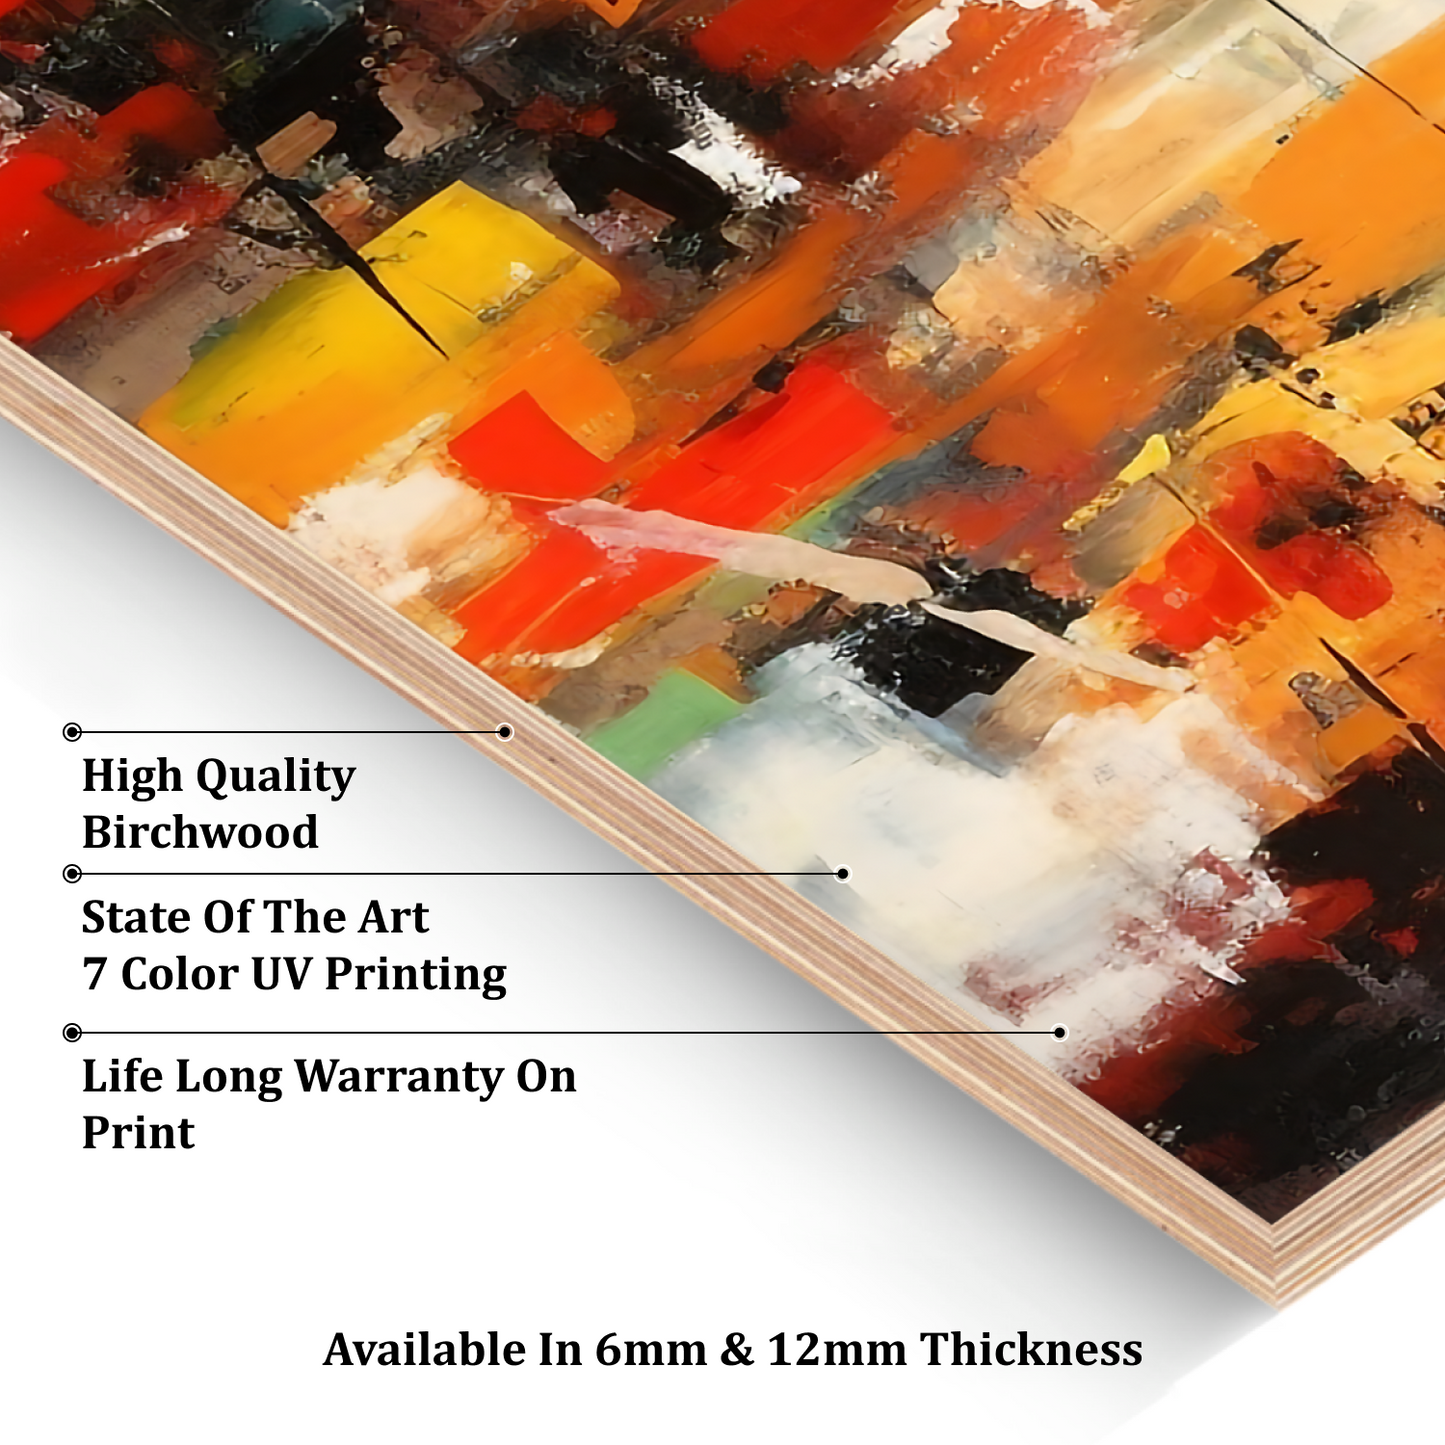 Colorful Abstract Luxury Wall Art Painting